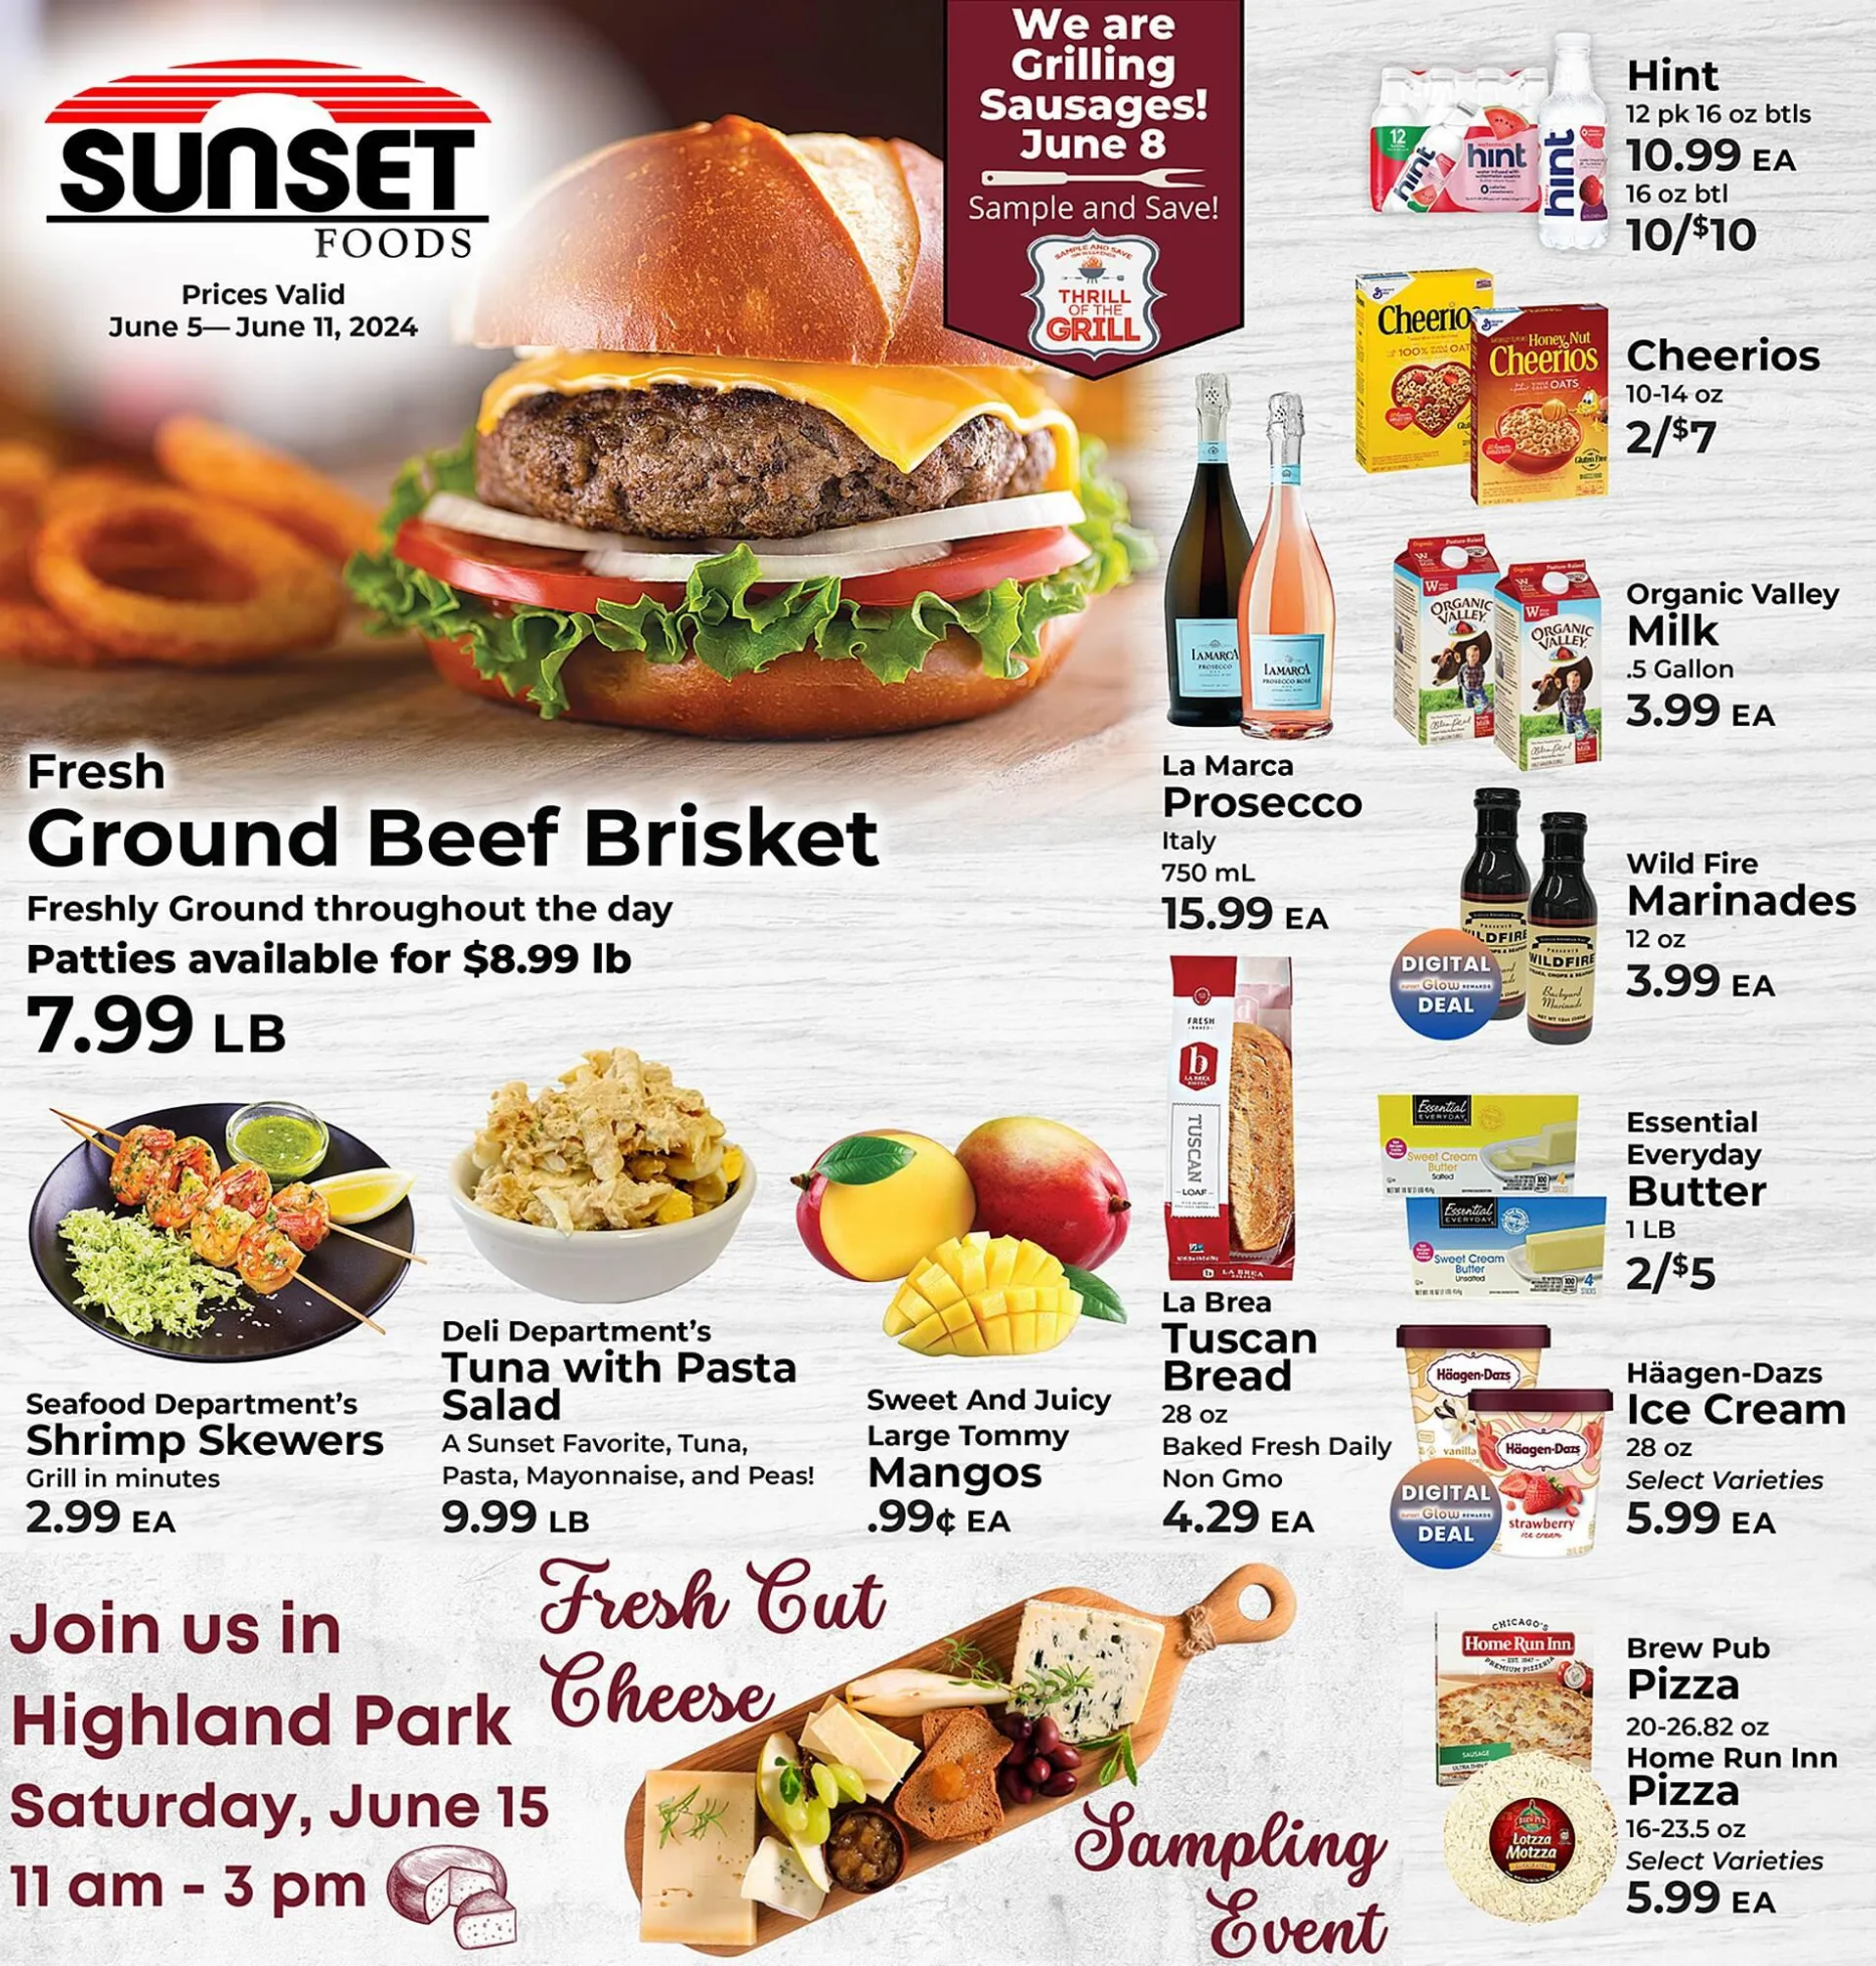 Sunset Foods Weekly Ad - 1